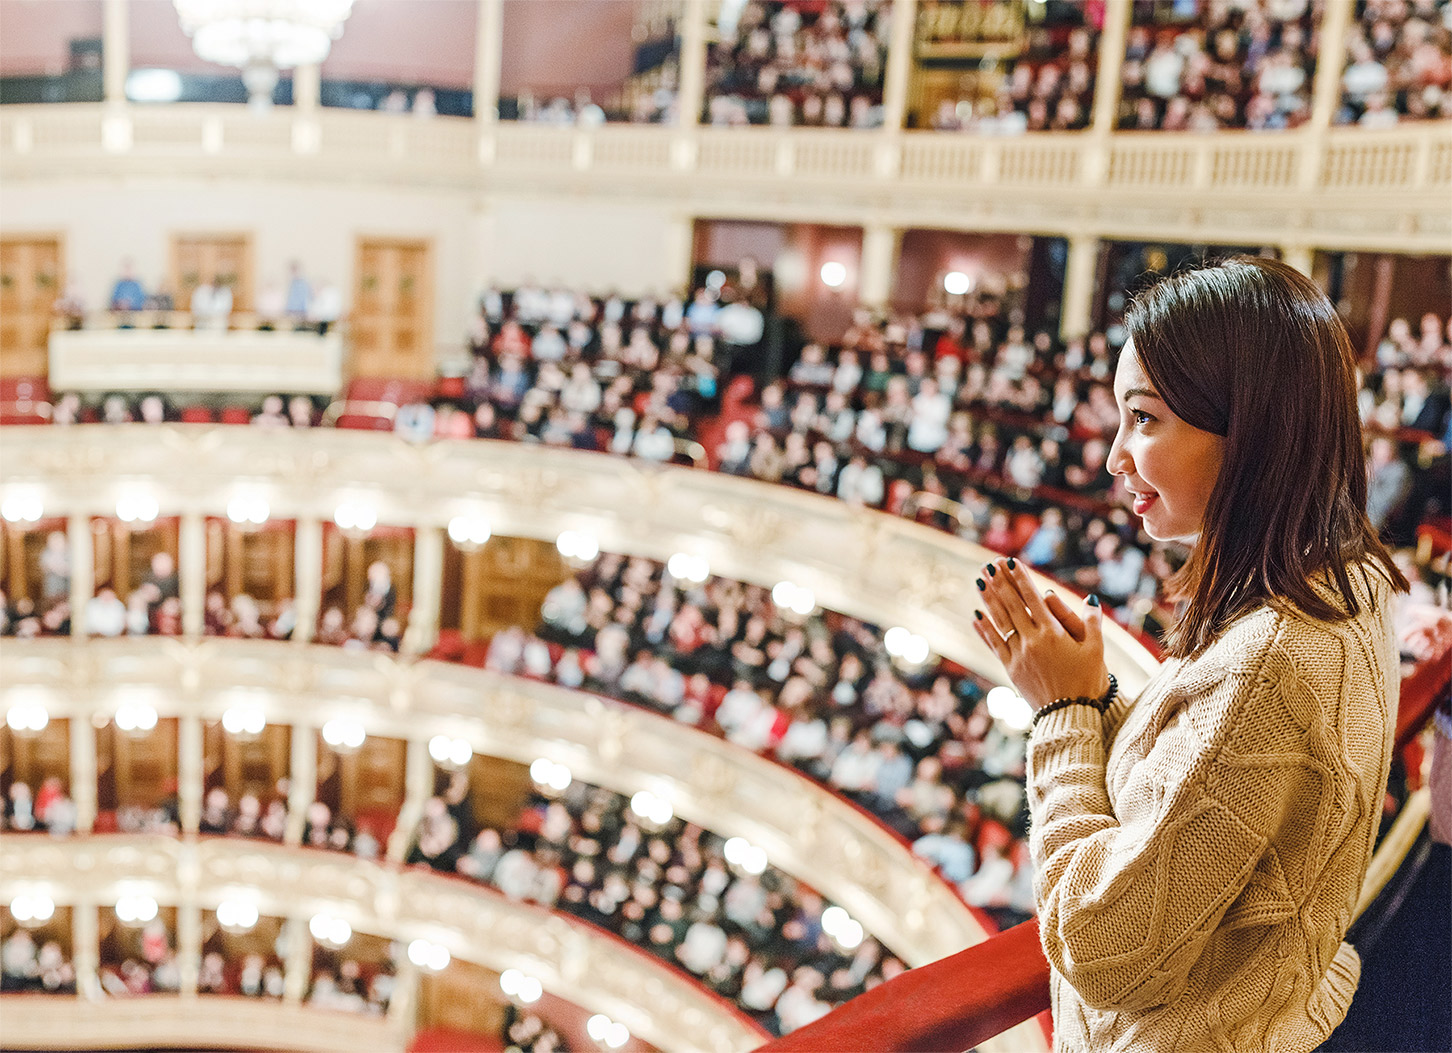 A woman applauding while standing over a performance theatre balcony